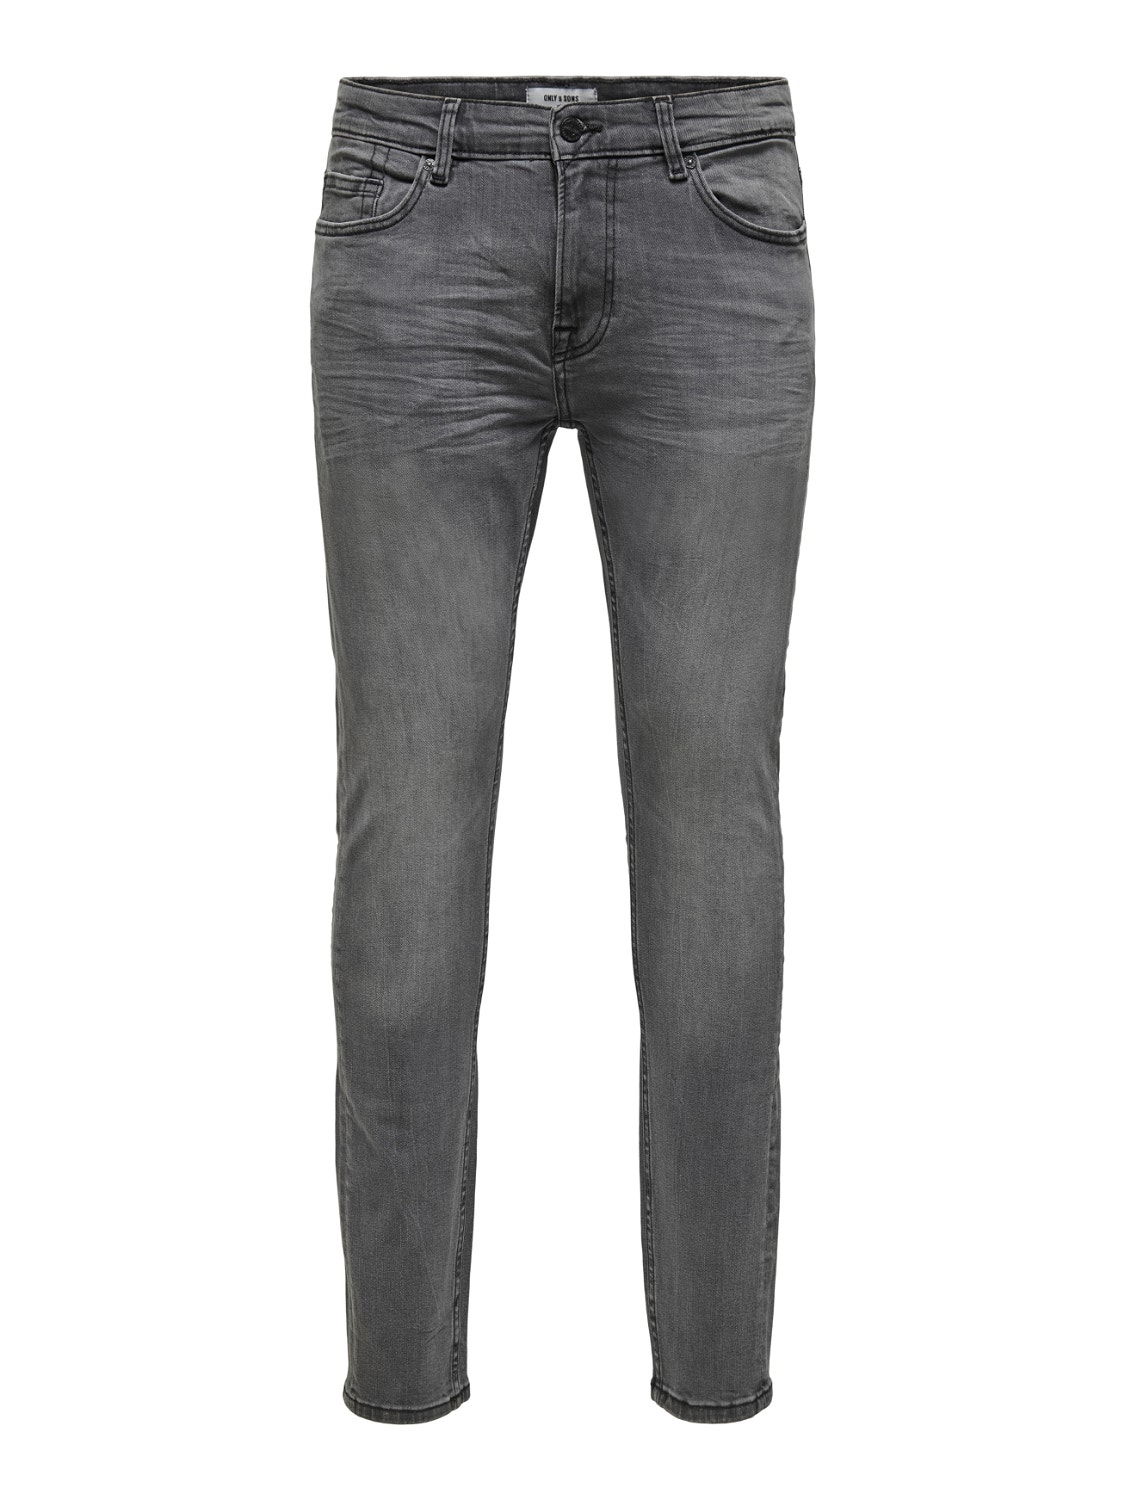 ONLY & SONS Skinny Fit Low rise Jeans -Grey Denim - 22012051